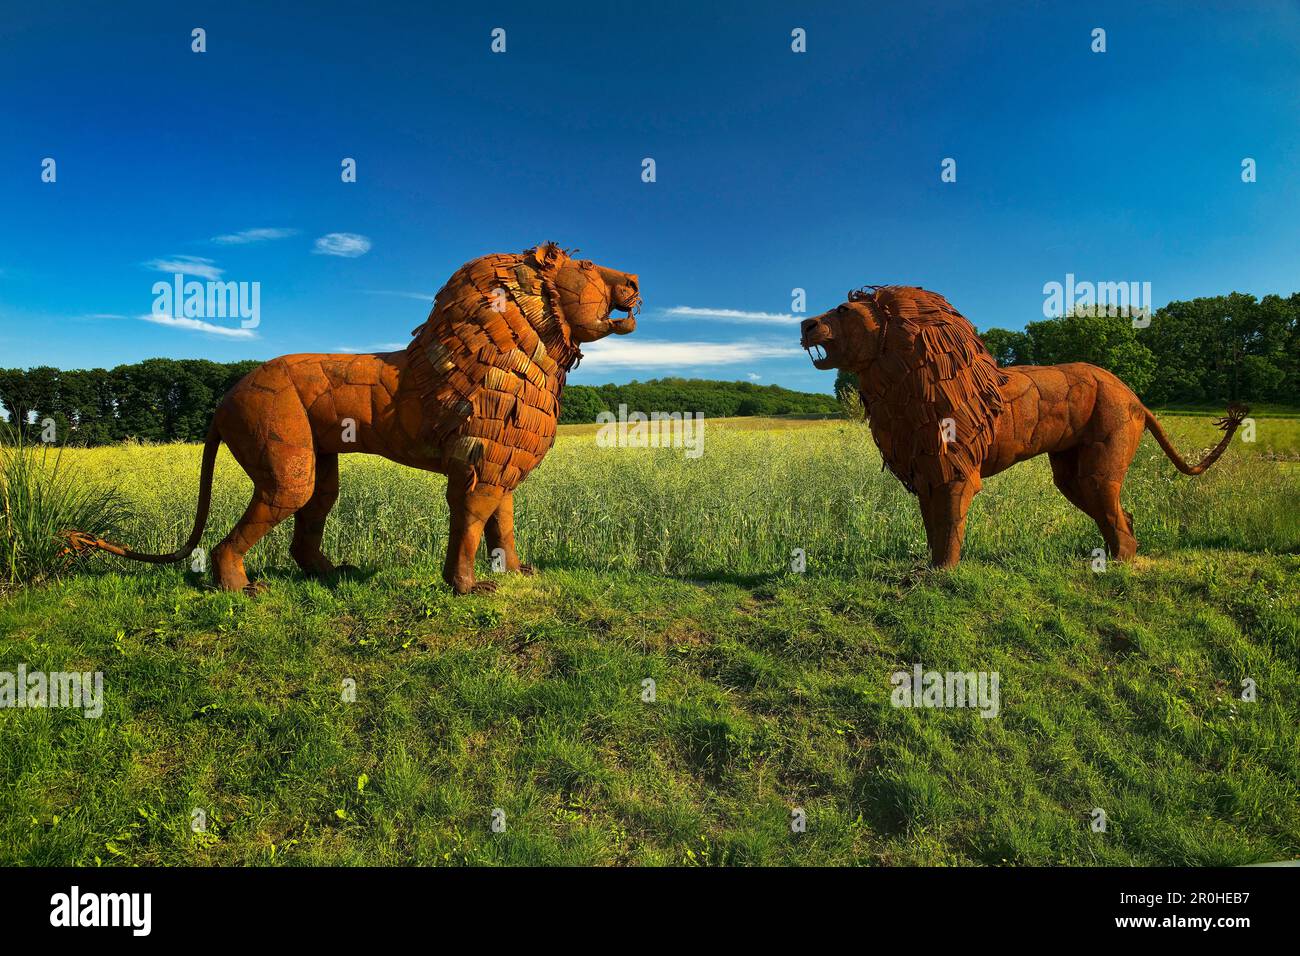 landscape in Muttental with exhibited metal sculptures of African animals, Shona-Art, Germany, North Rhine-Westphalia, Ruhr Area, Witten Stock Photo